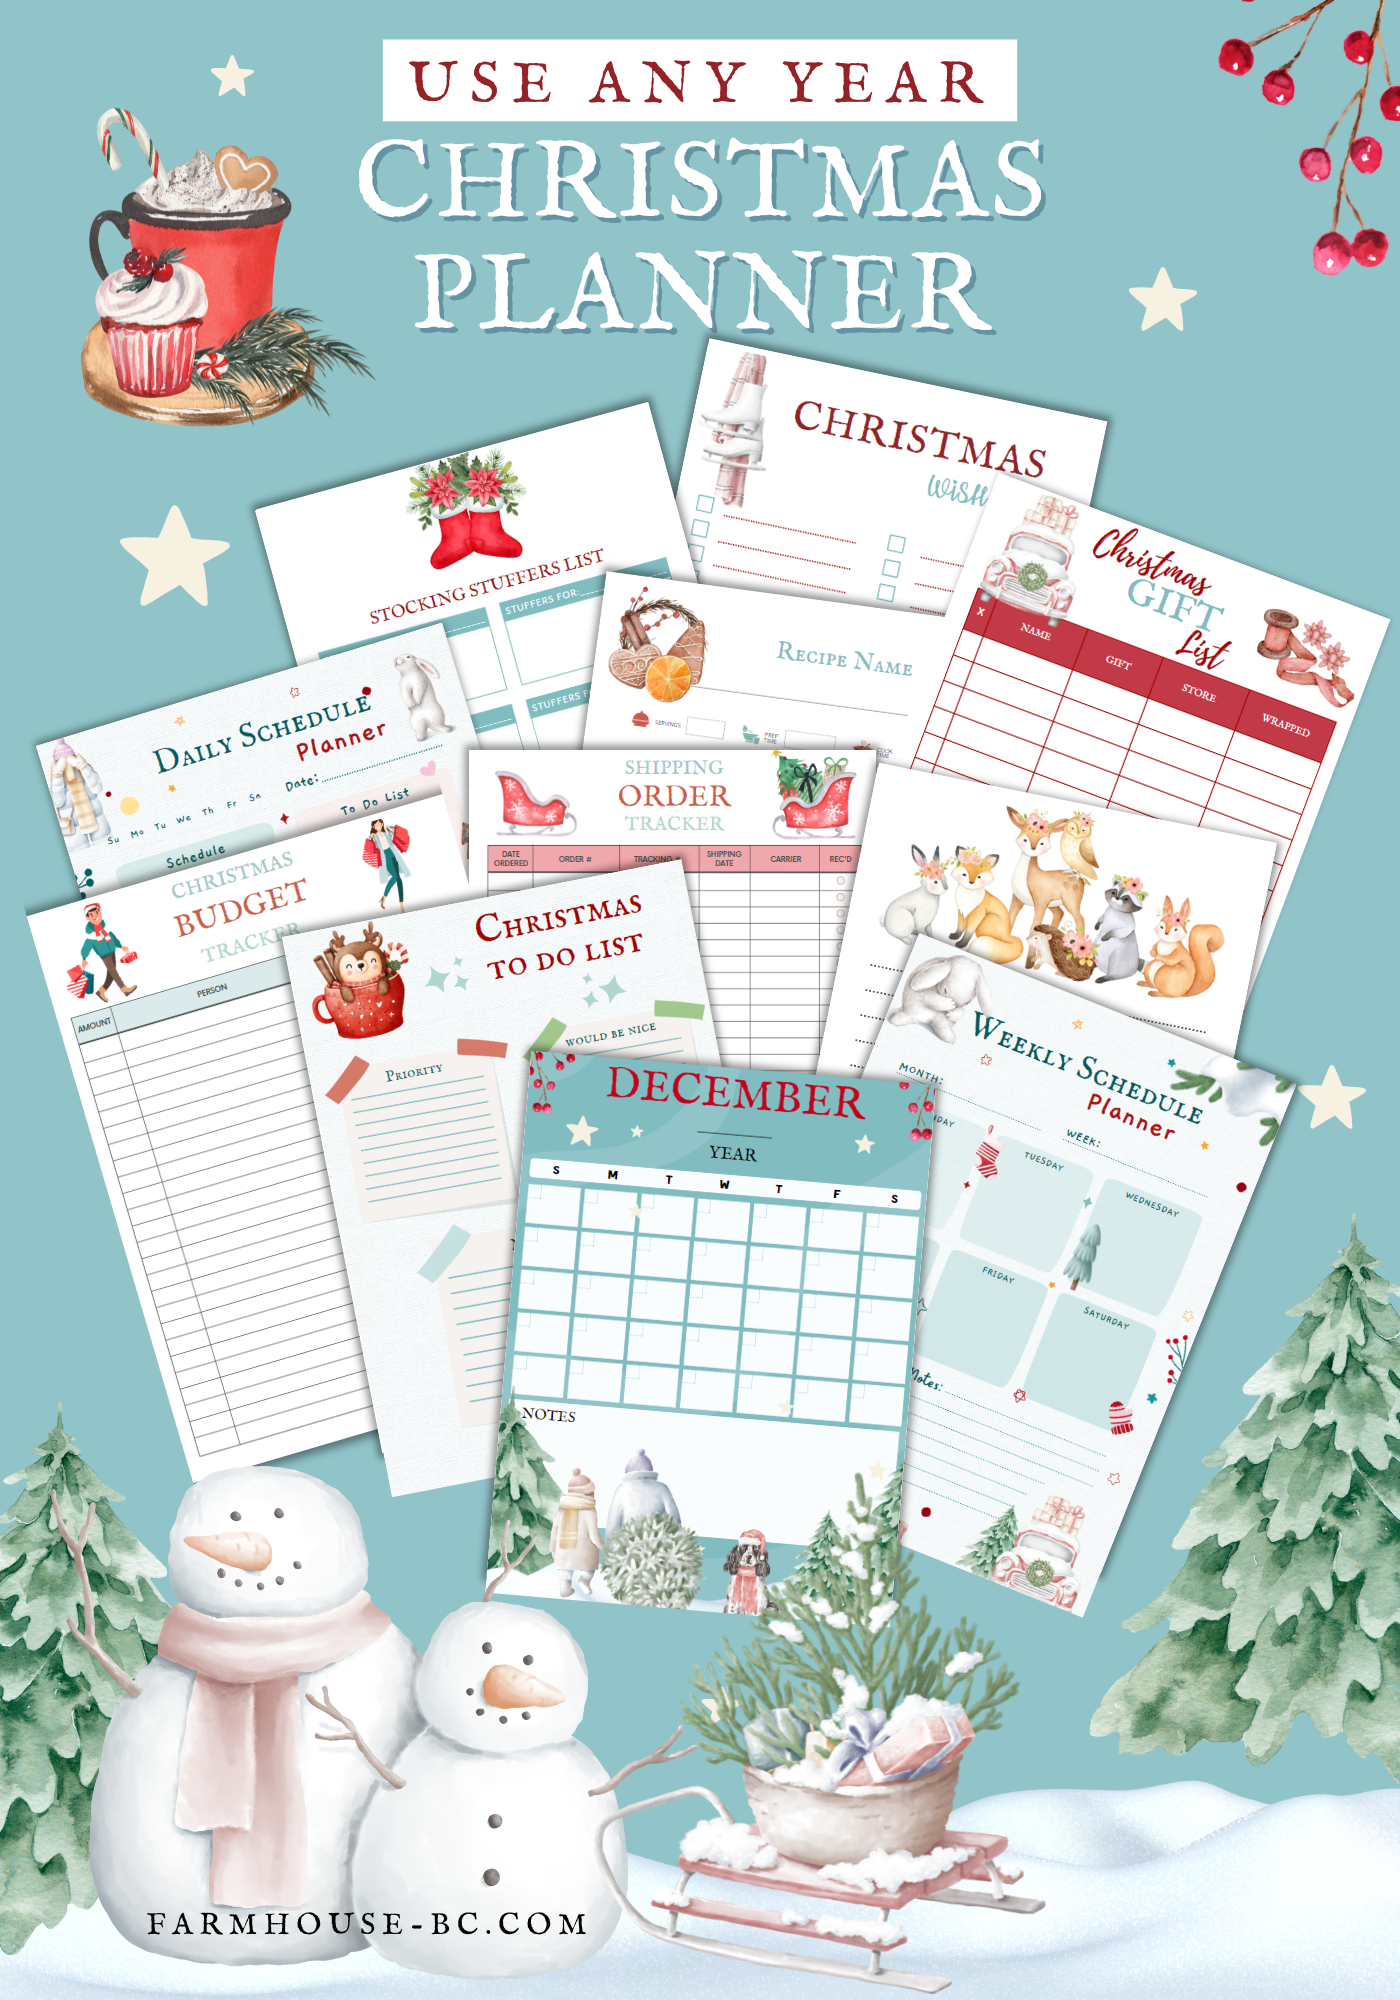 Easy to use perpetual Christmas Planner for any year.